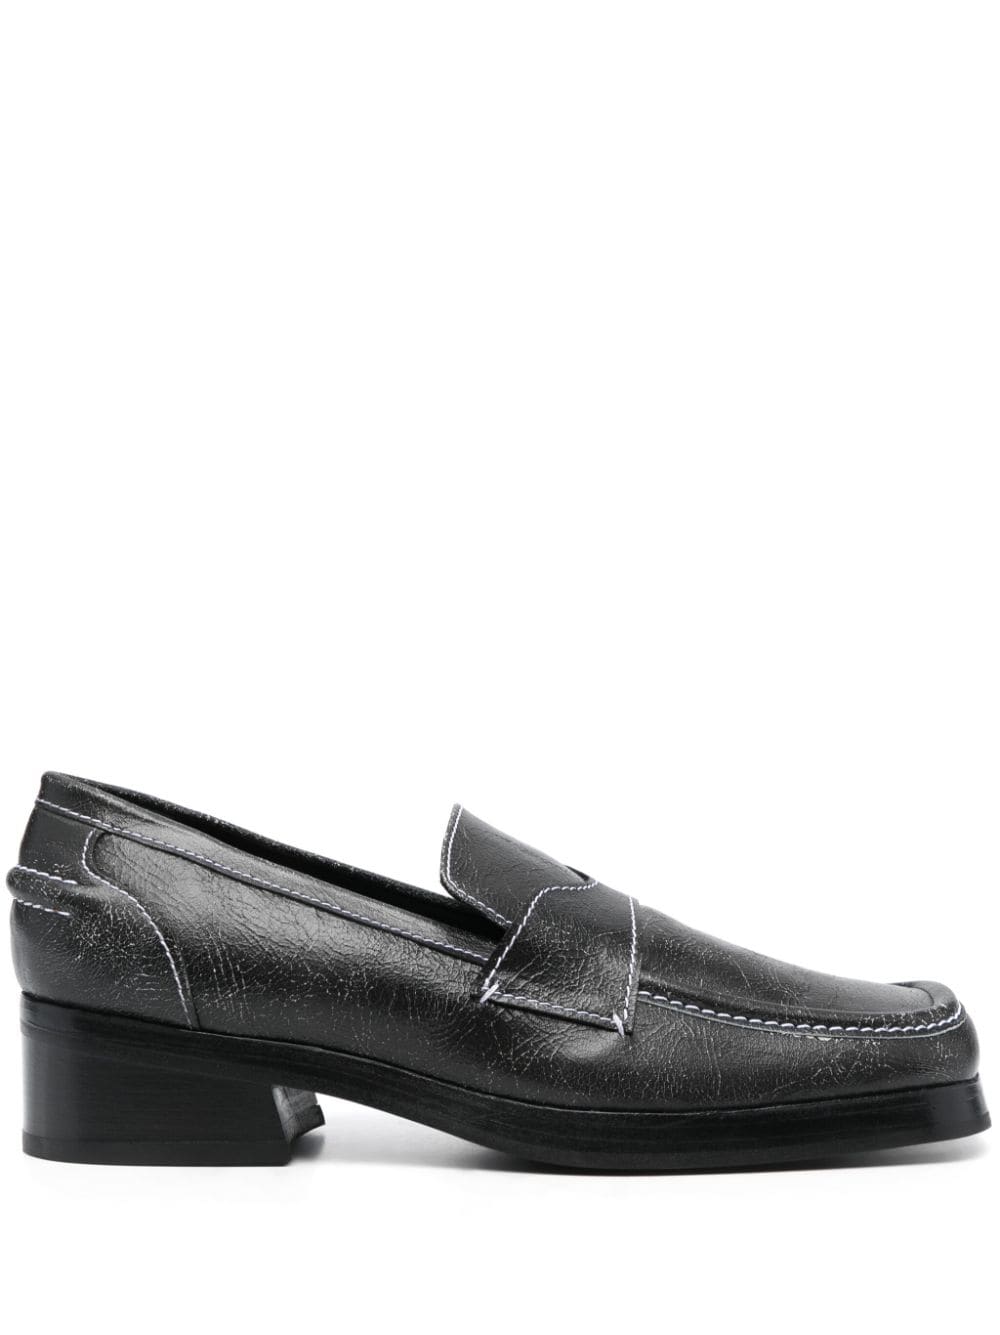 ECKHAUS LATTA CONTRAST-STITCHING CRACKED-LEATHER LOAFERS